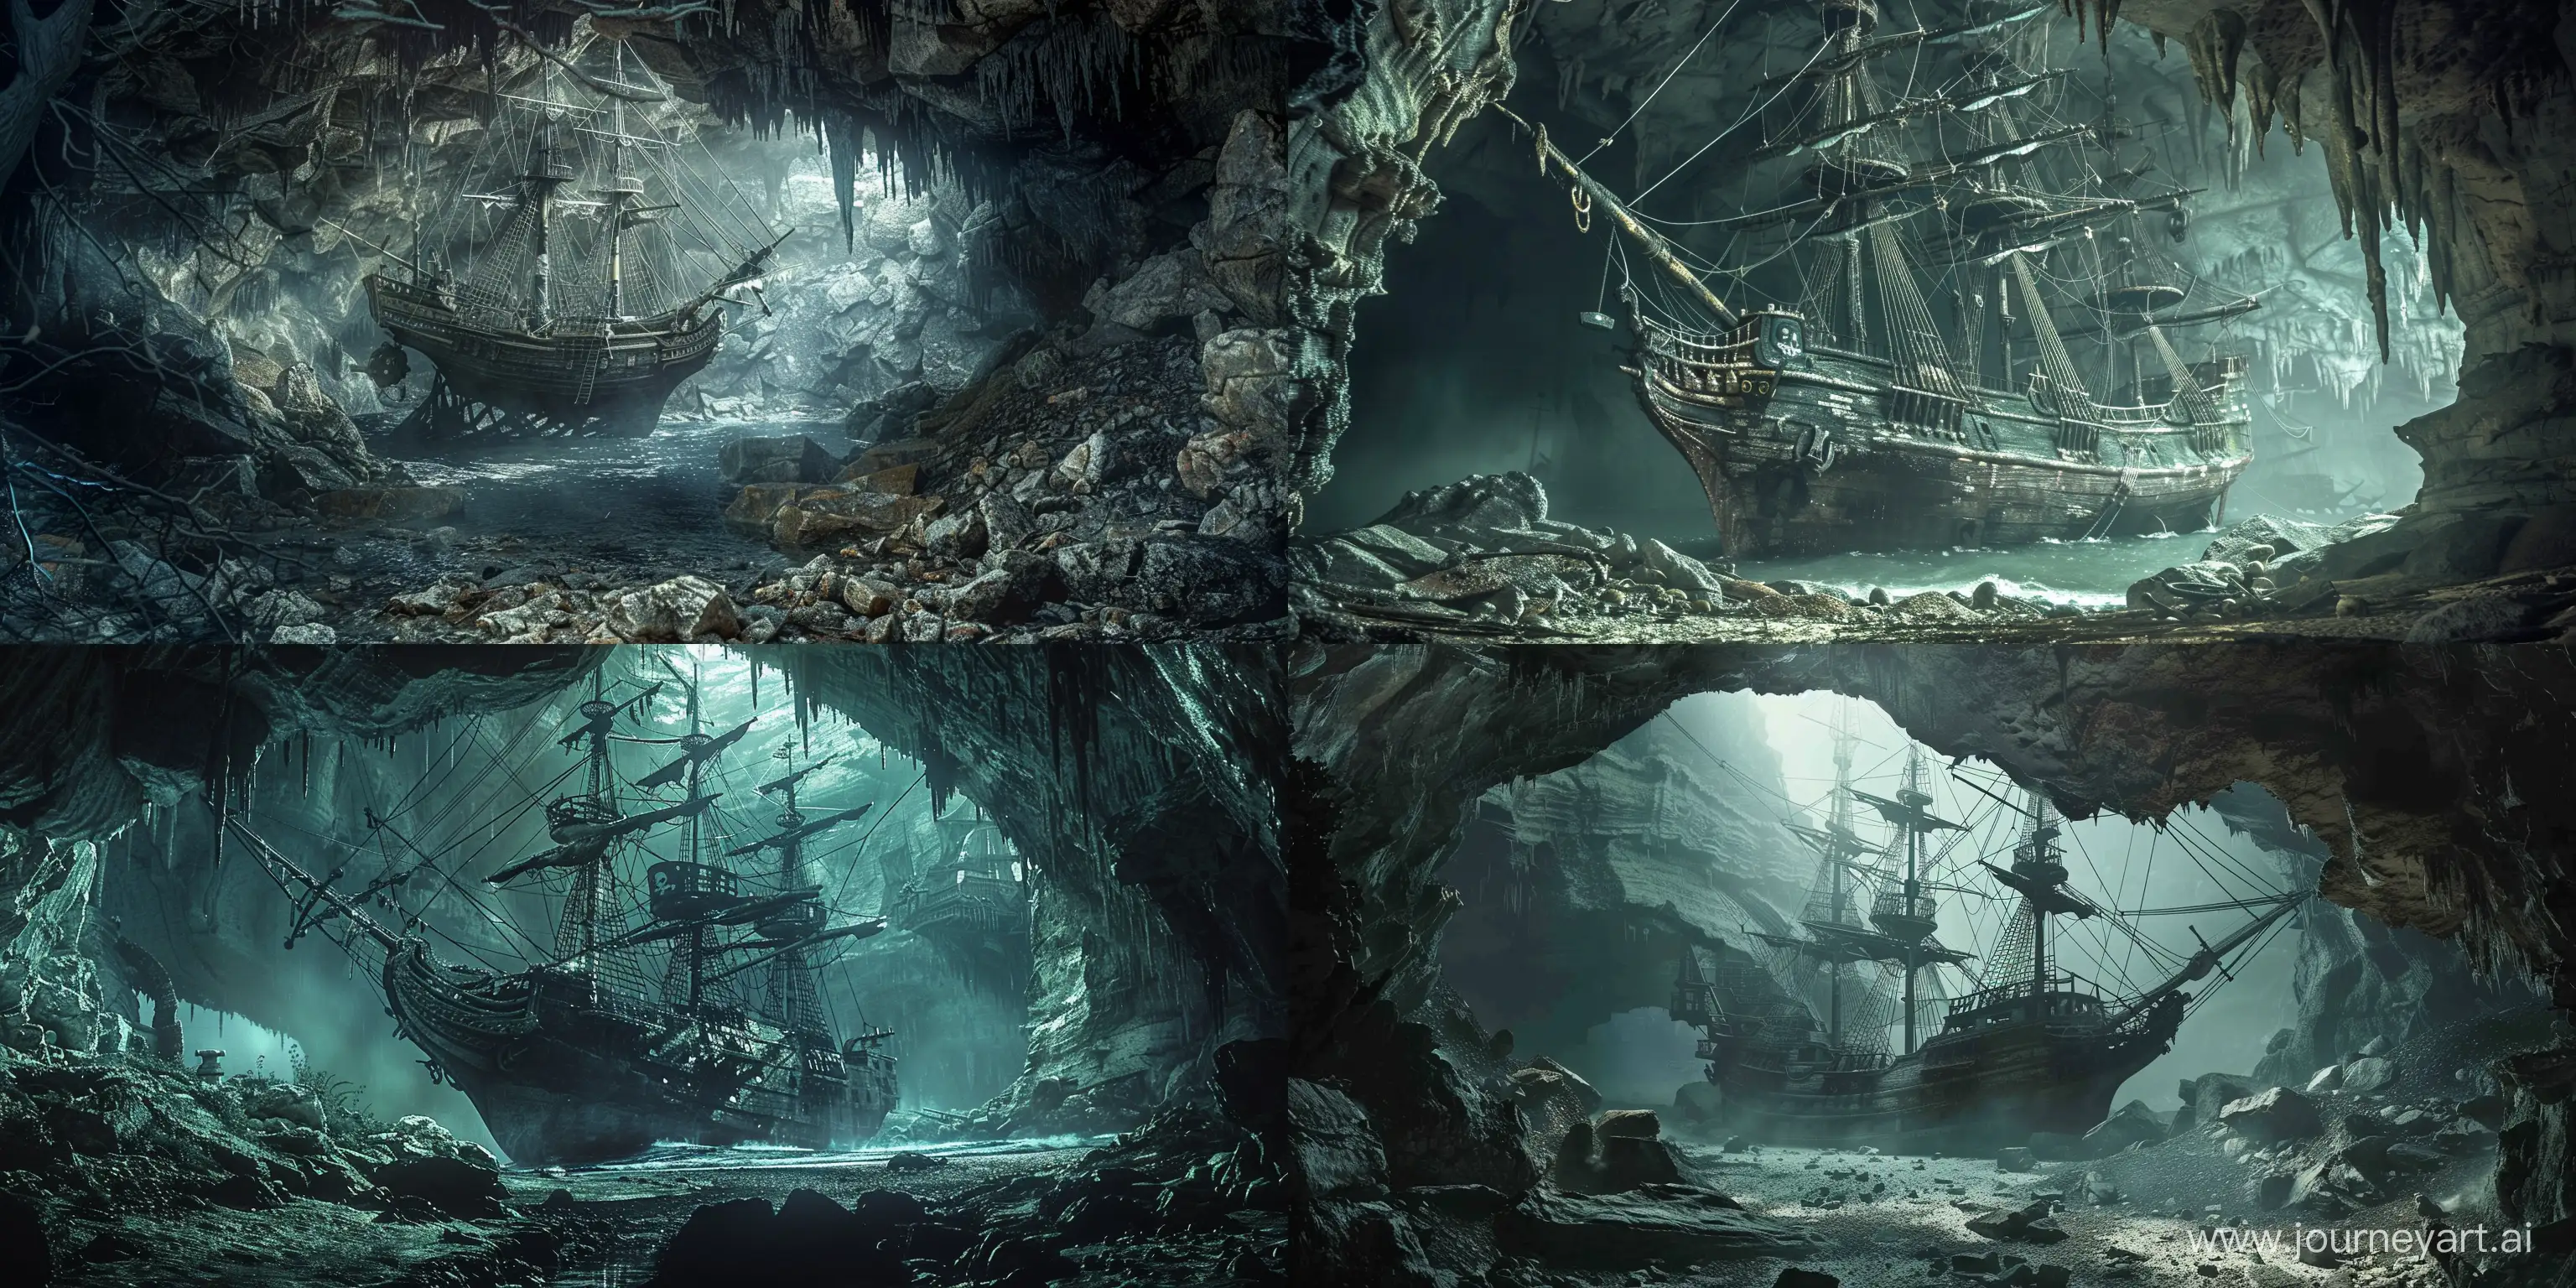 Gloomy-Dark-Fantasy-Landscape-Abandoned-Pirate-Ship-in-a-Cave